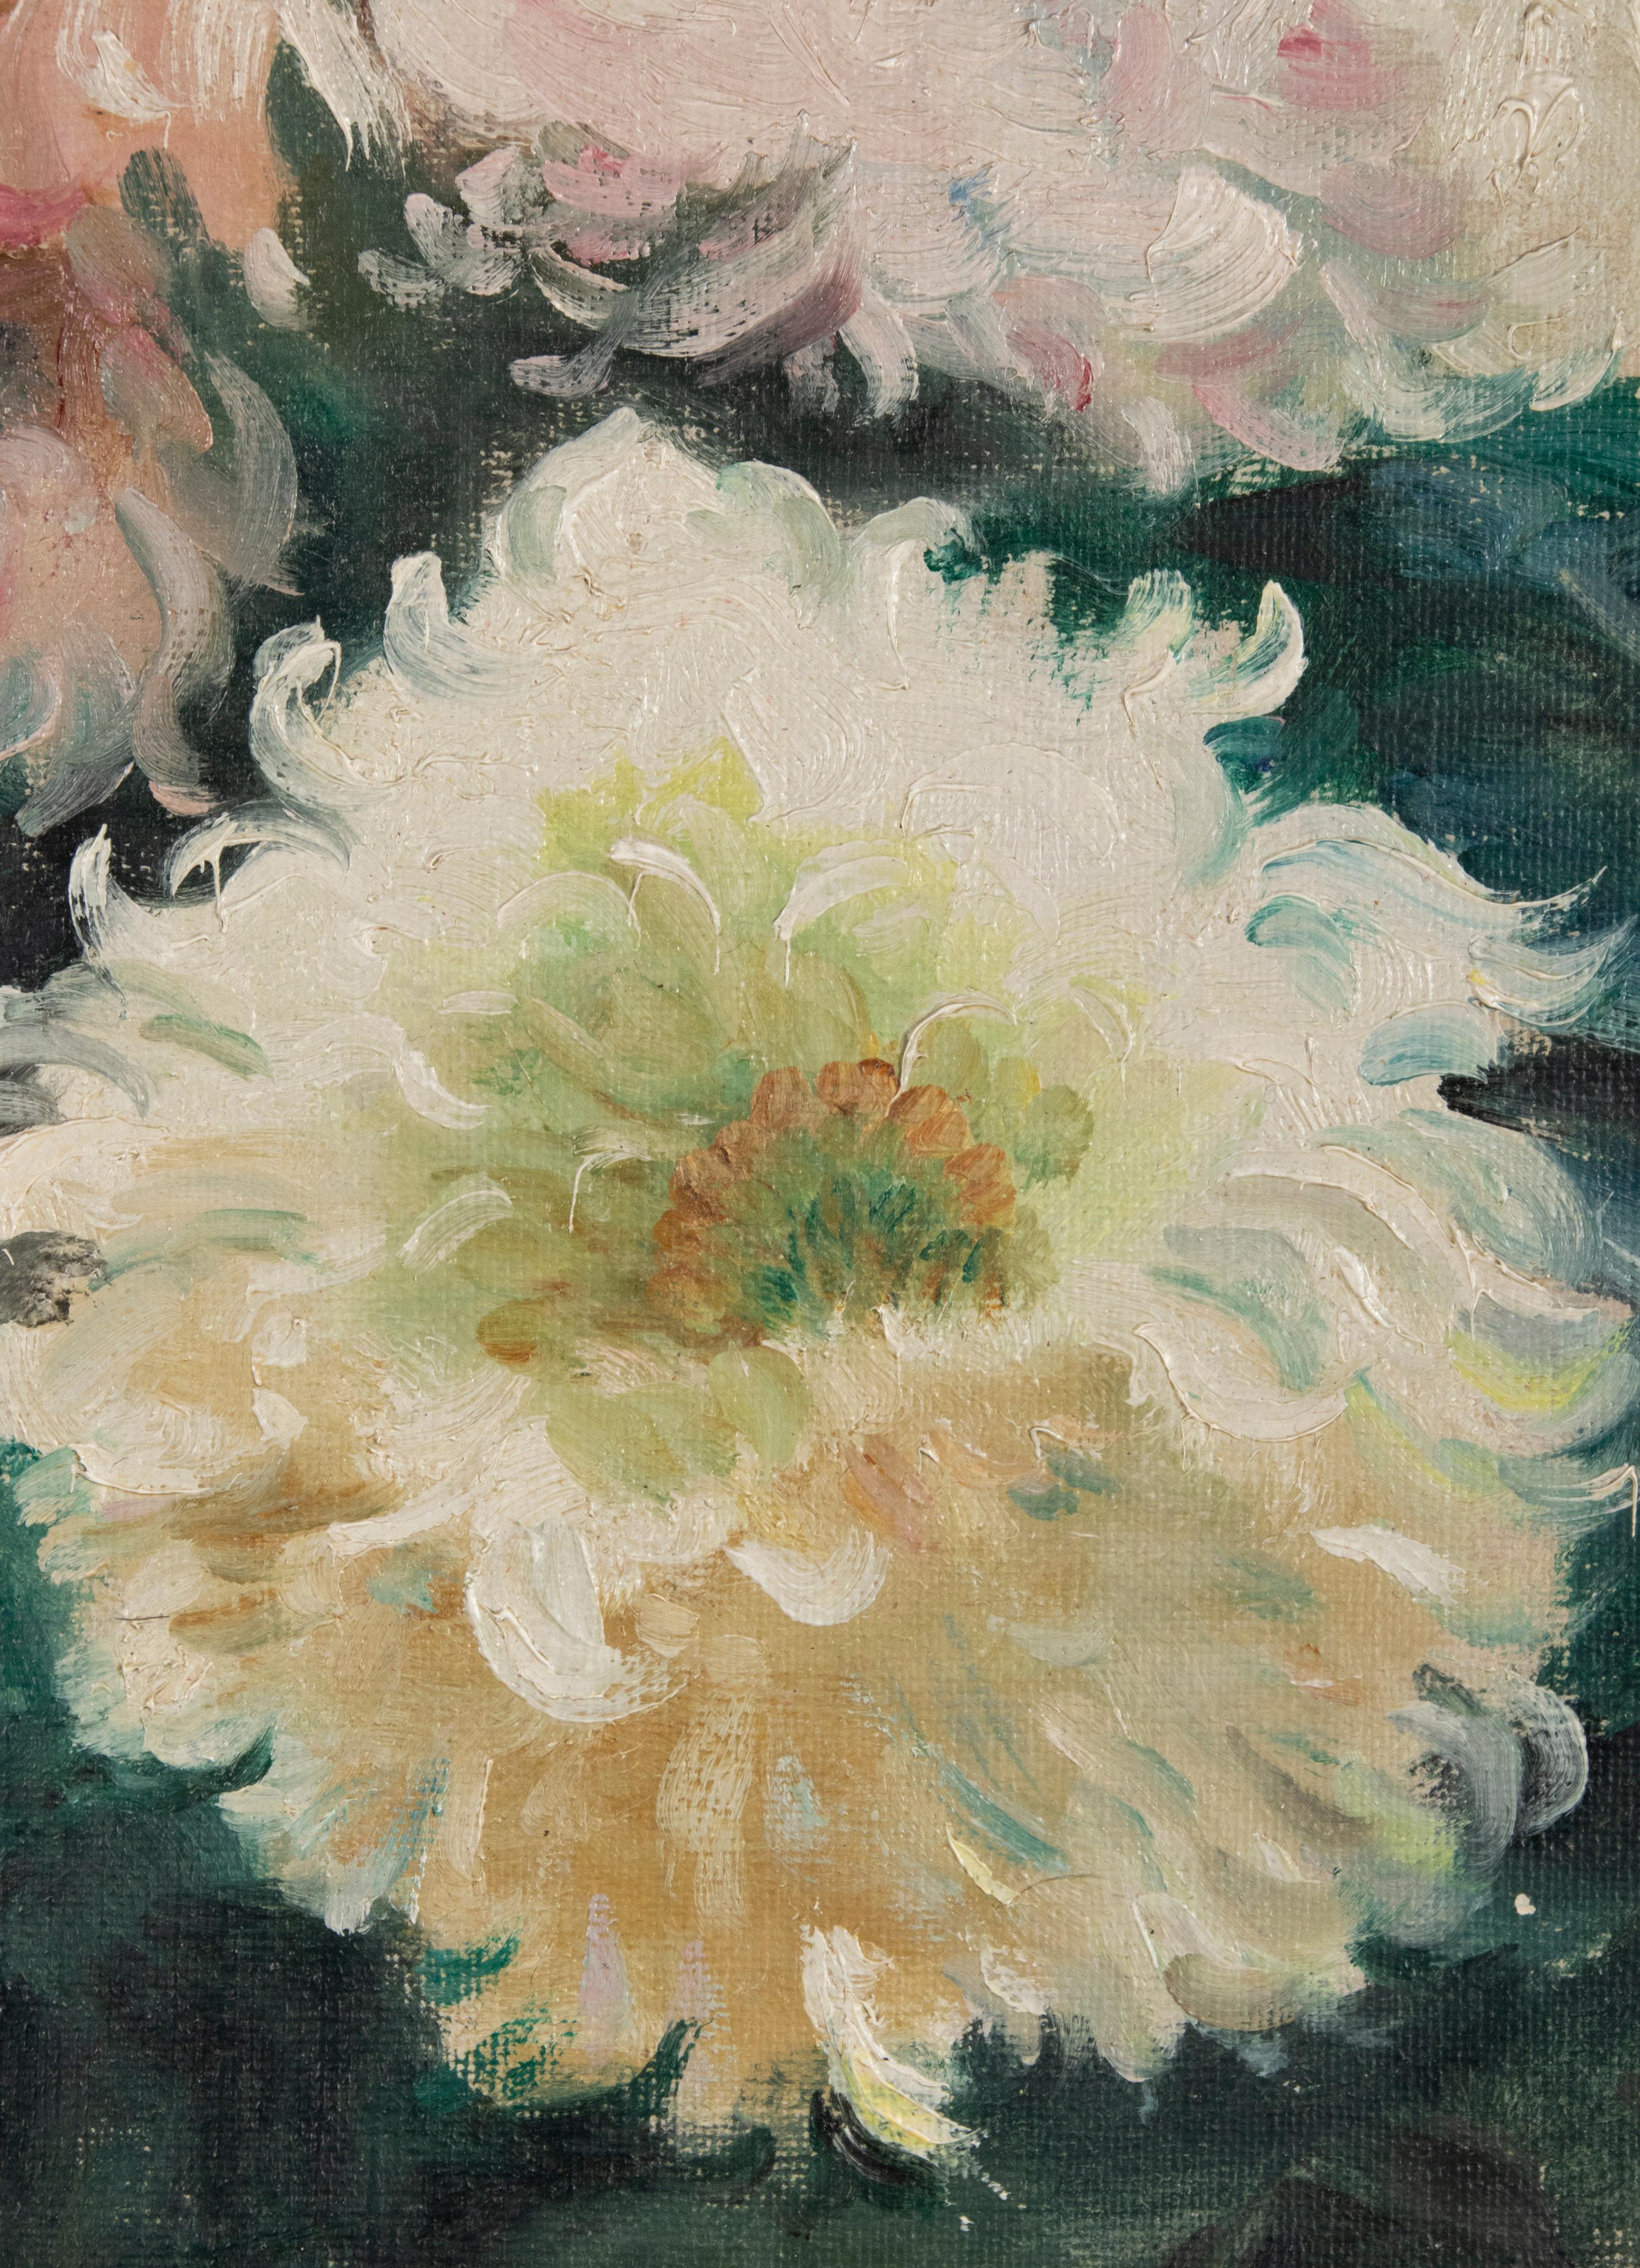 Hand-Painted Early 20th Century Flower Painting by Pol C. Parmentier, 1927 For Sale